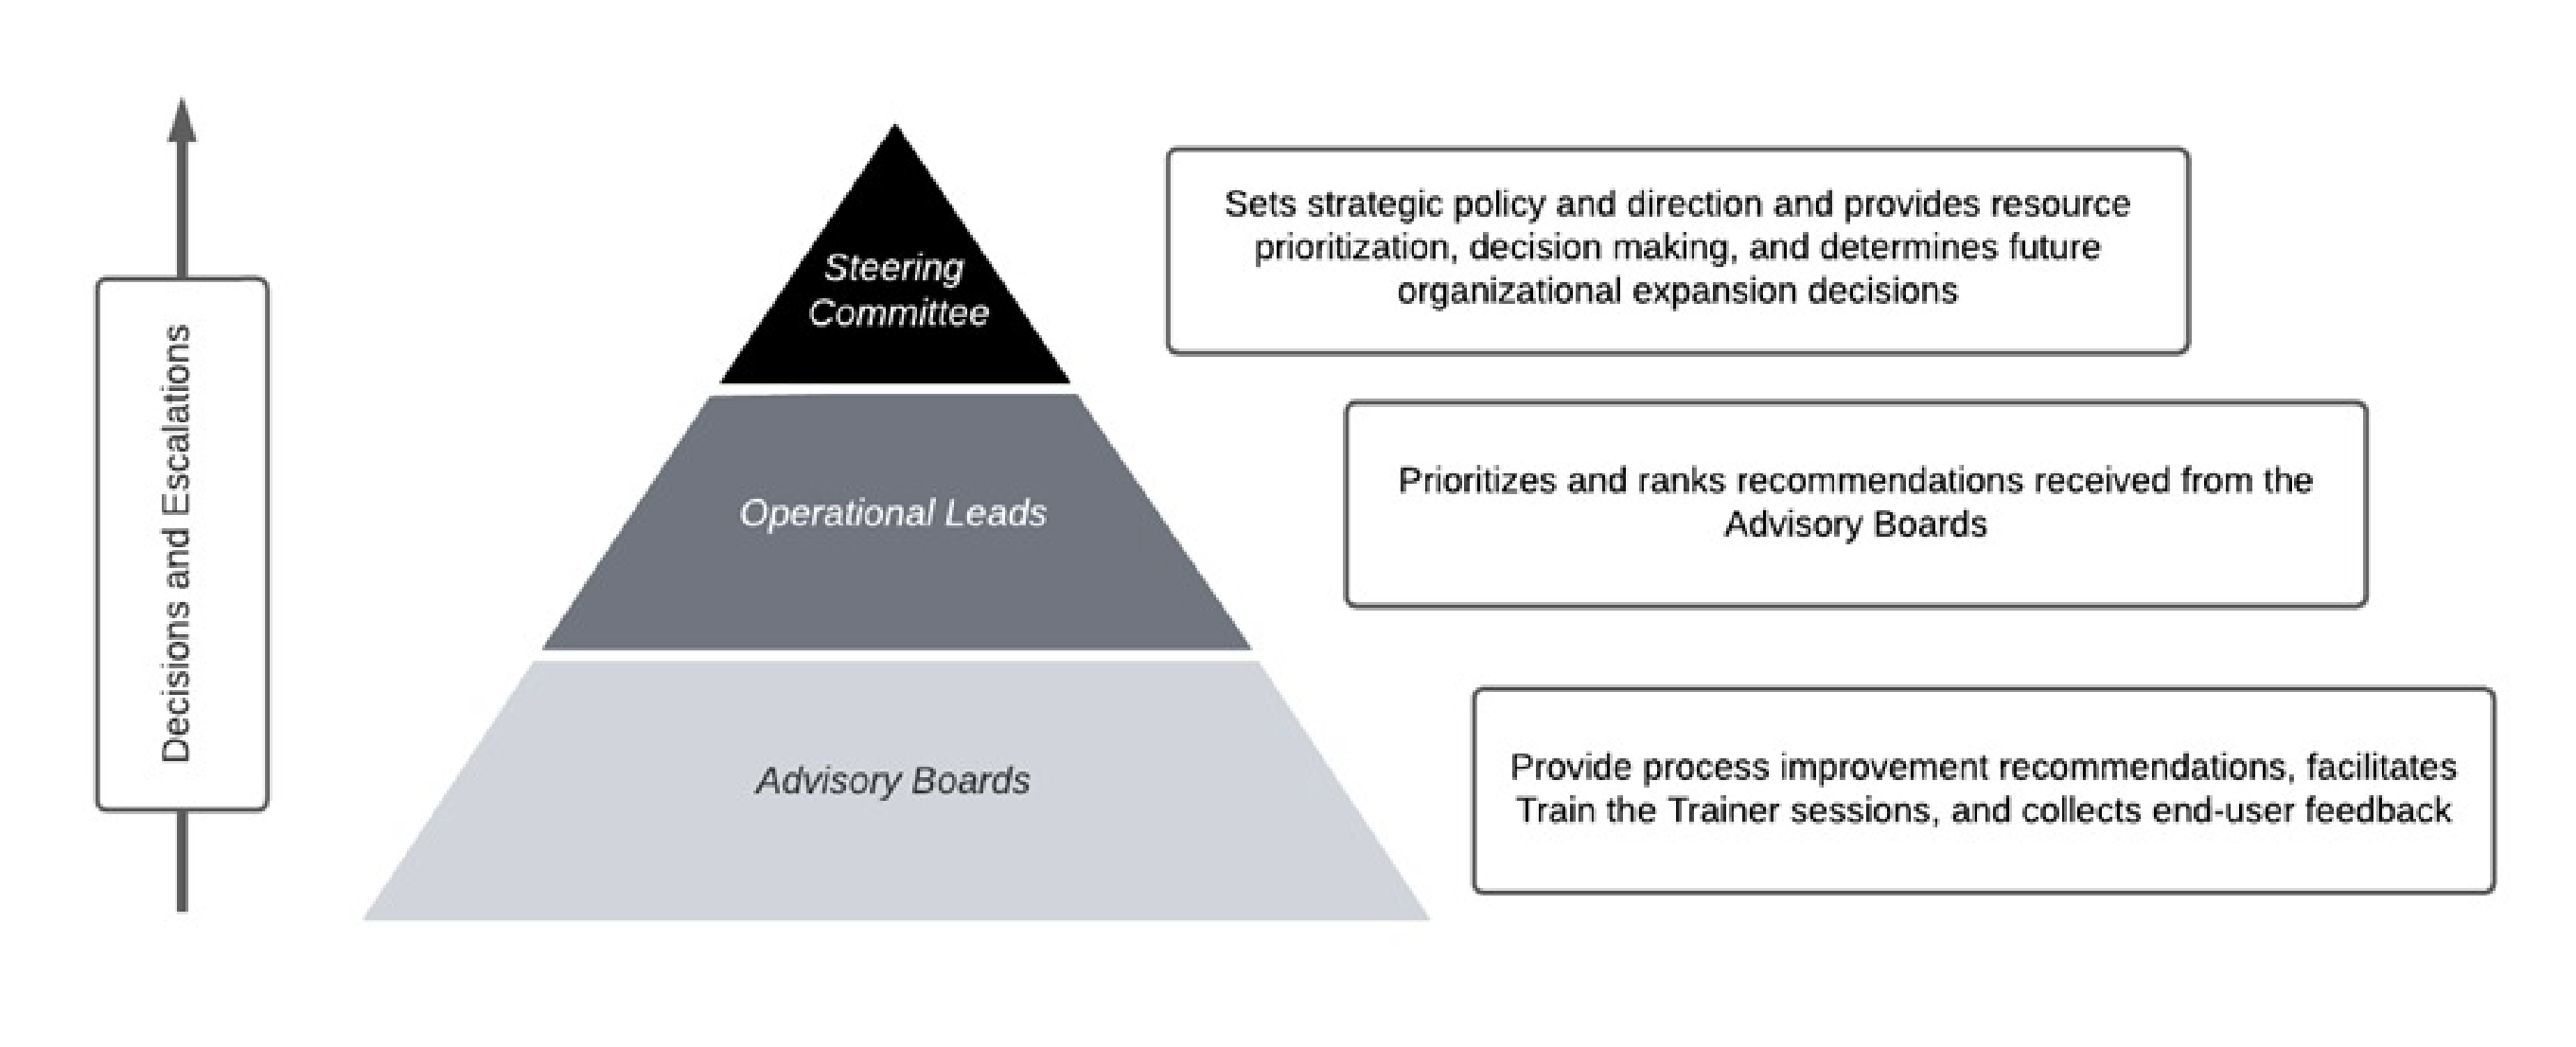 graphic of a pyramid with three levels: Advisory Boards on the bottom, Operational Leads in the middle, and Steering Committee on the top